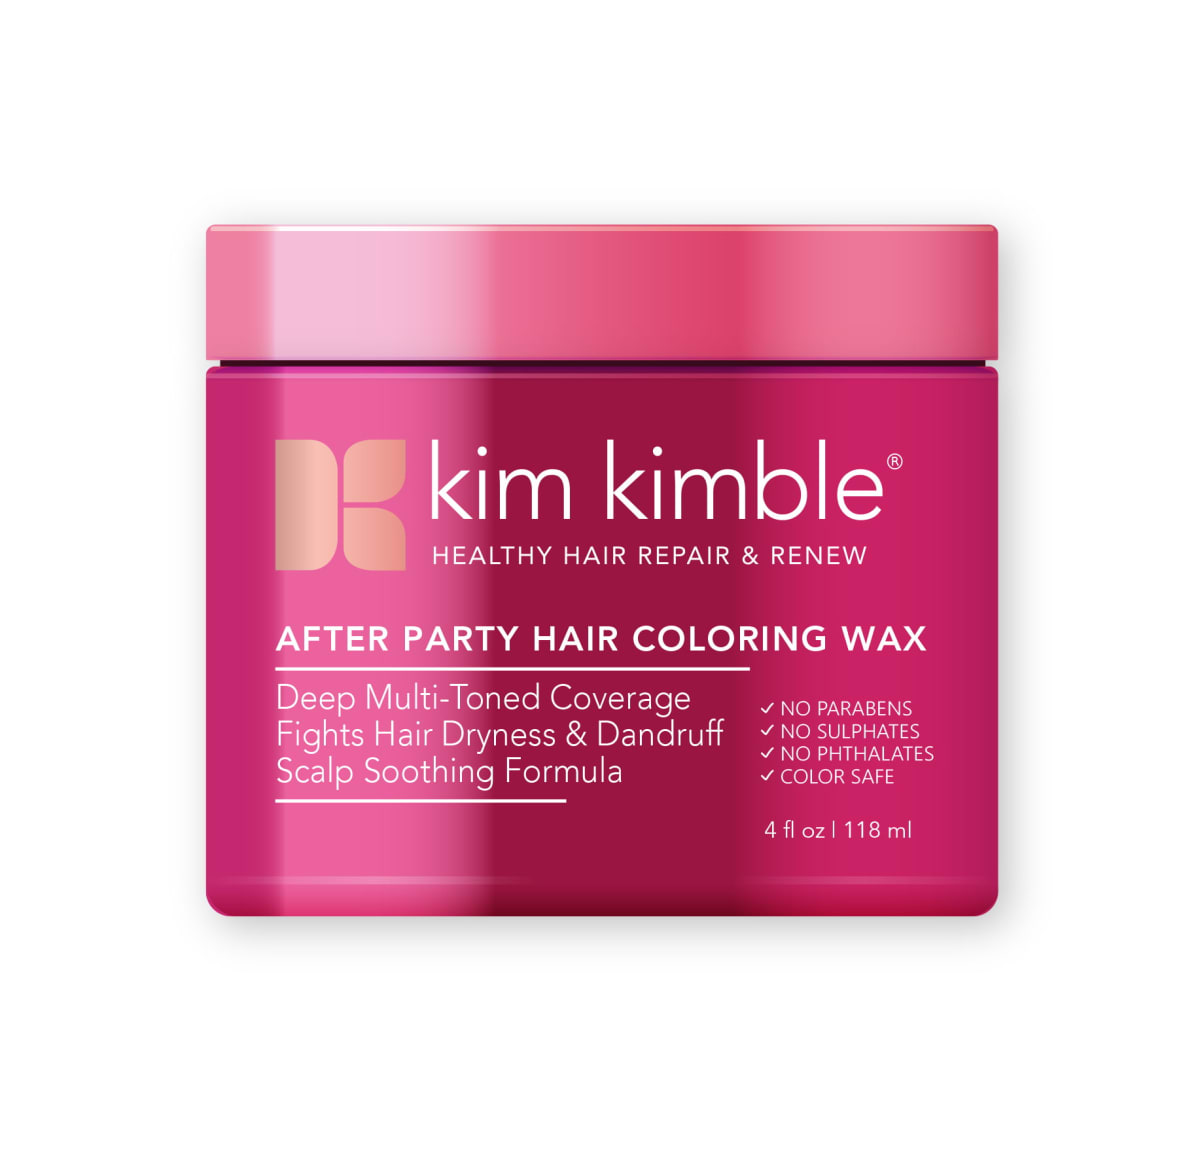 This $6 Temporary Hair Color Wax Made Me Feel Like Halle Berry in 'X-Men'